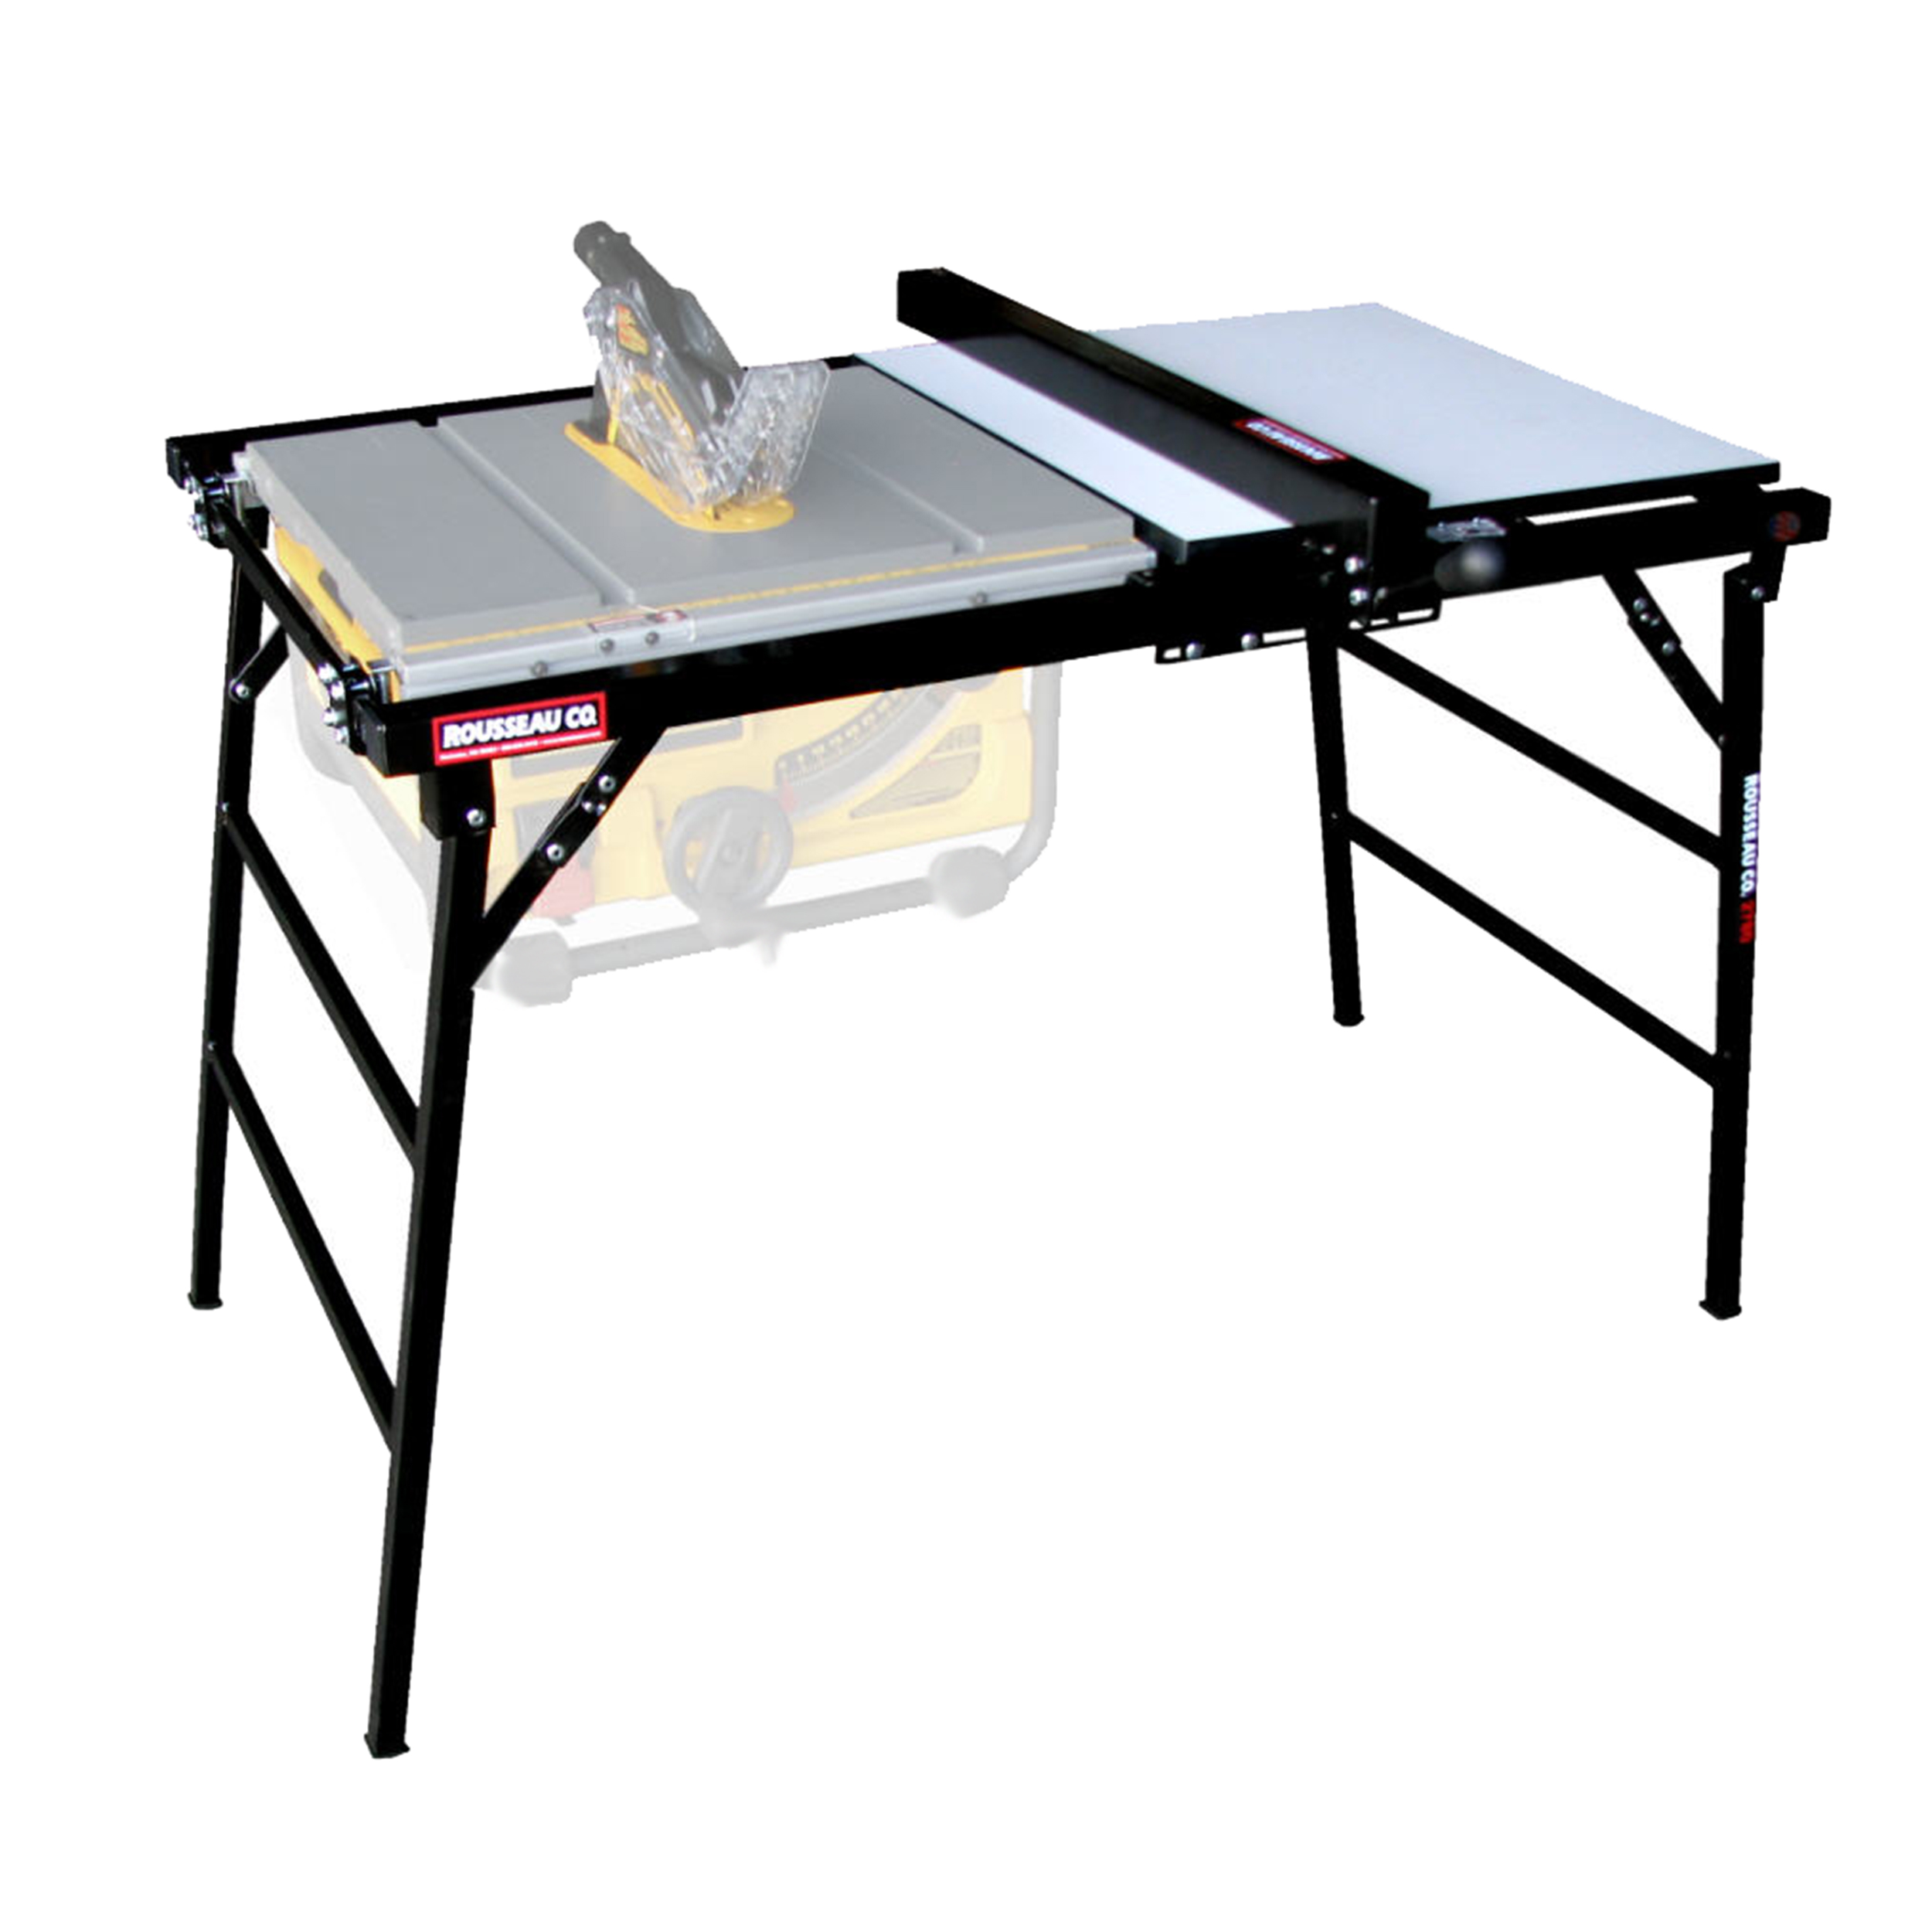 Portamax Model 2780 Table Saw Stand